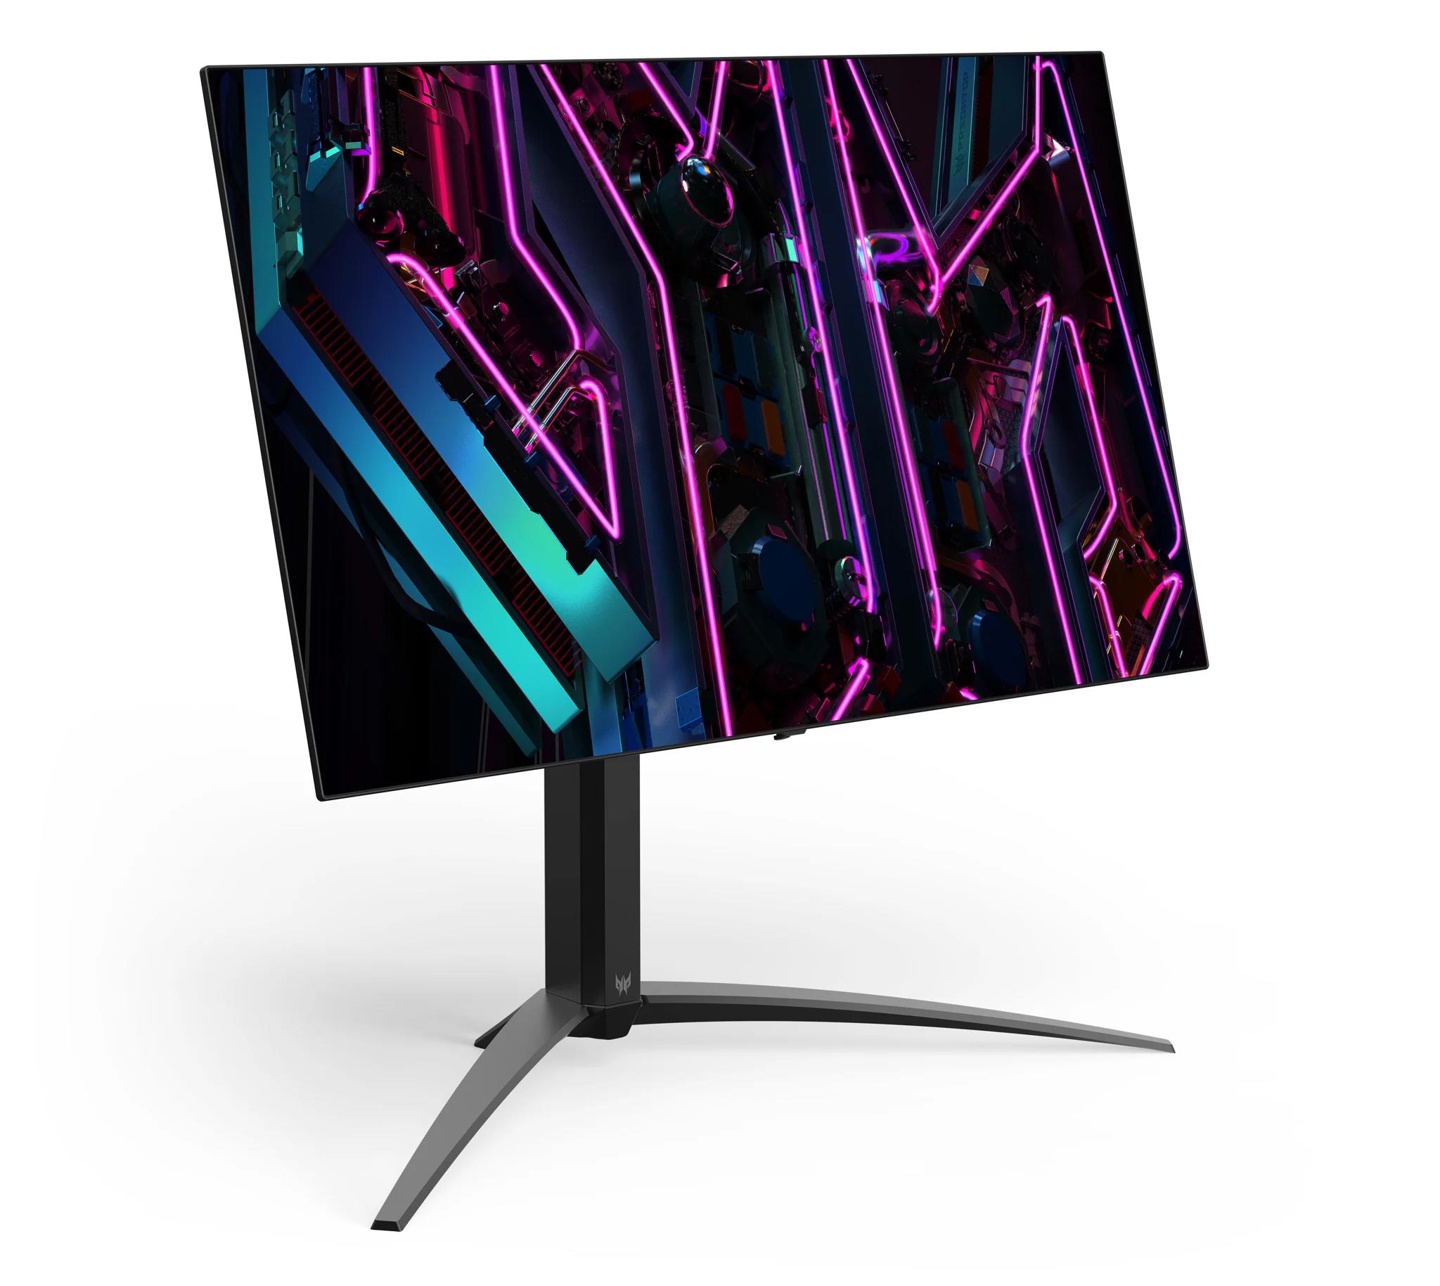 Acer Predator X27U 240Hz 27-inch 1440p OLED Gaming Monitor Review